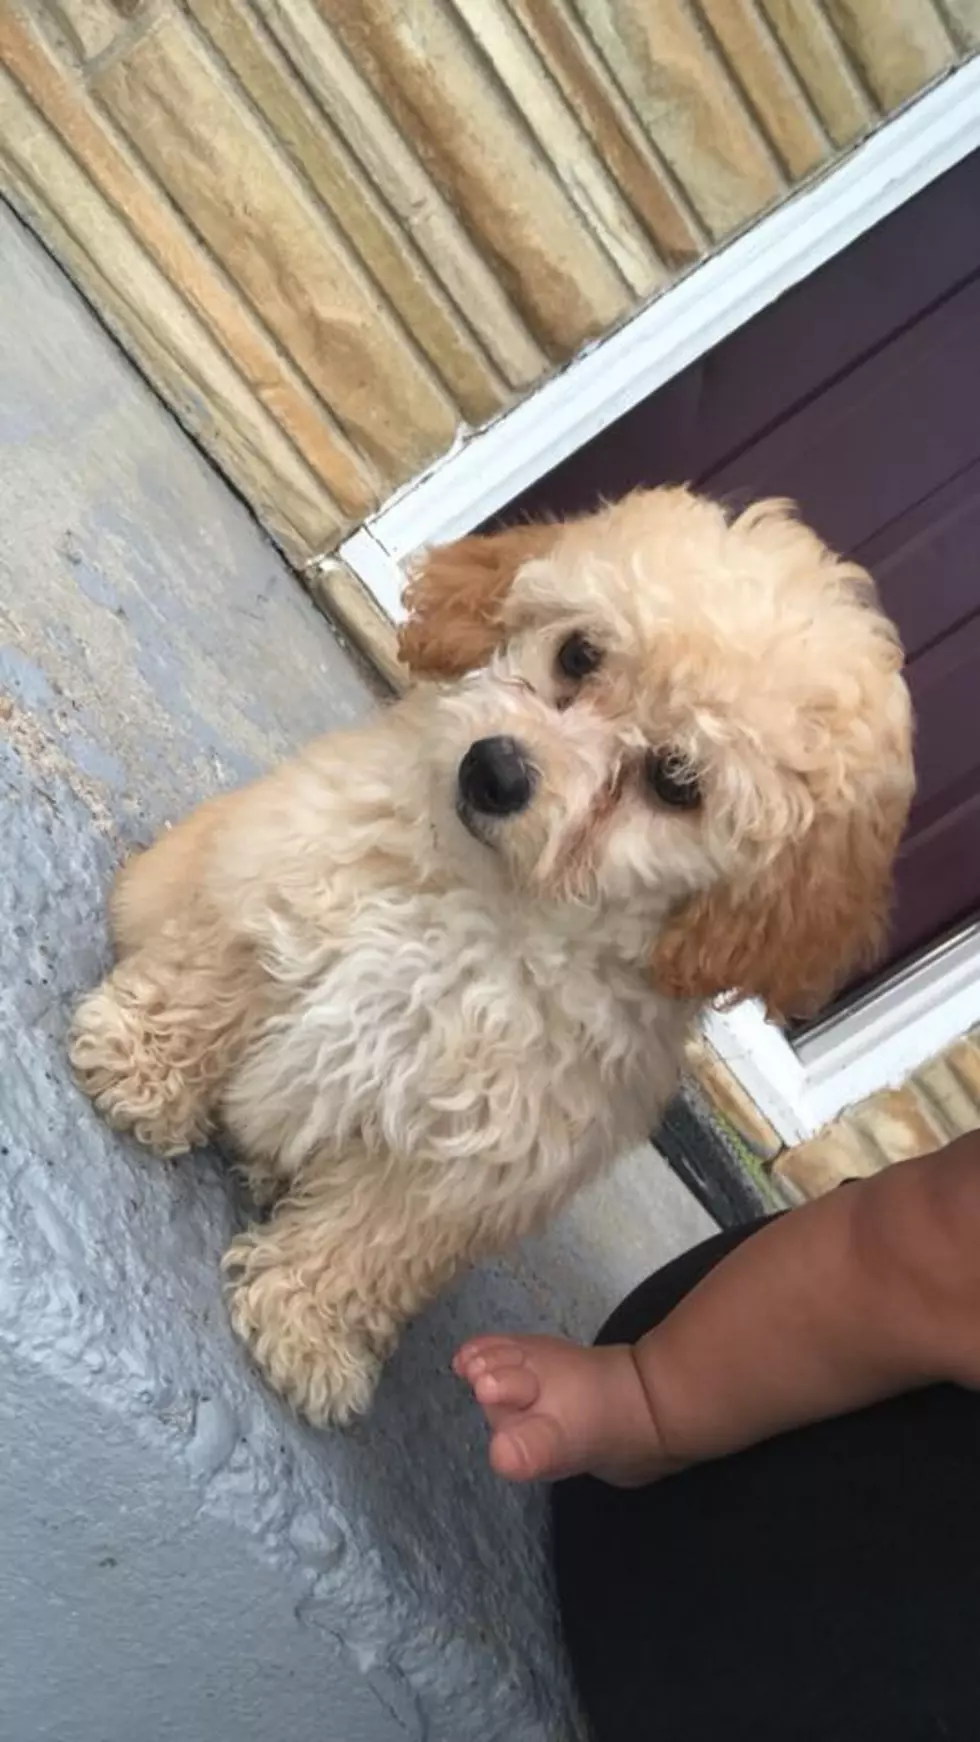 Greeley Family Needs Help Finding Stolen Poodle Puppy